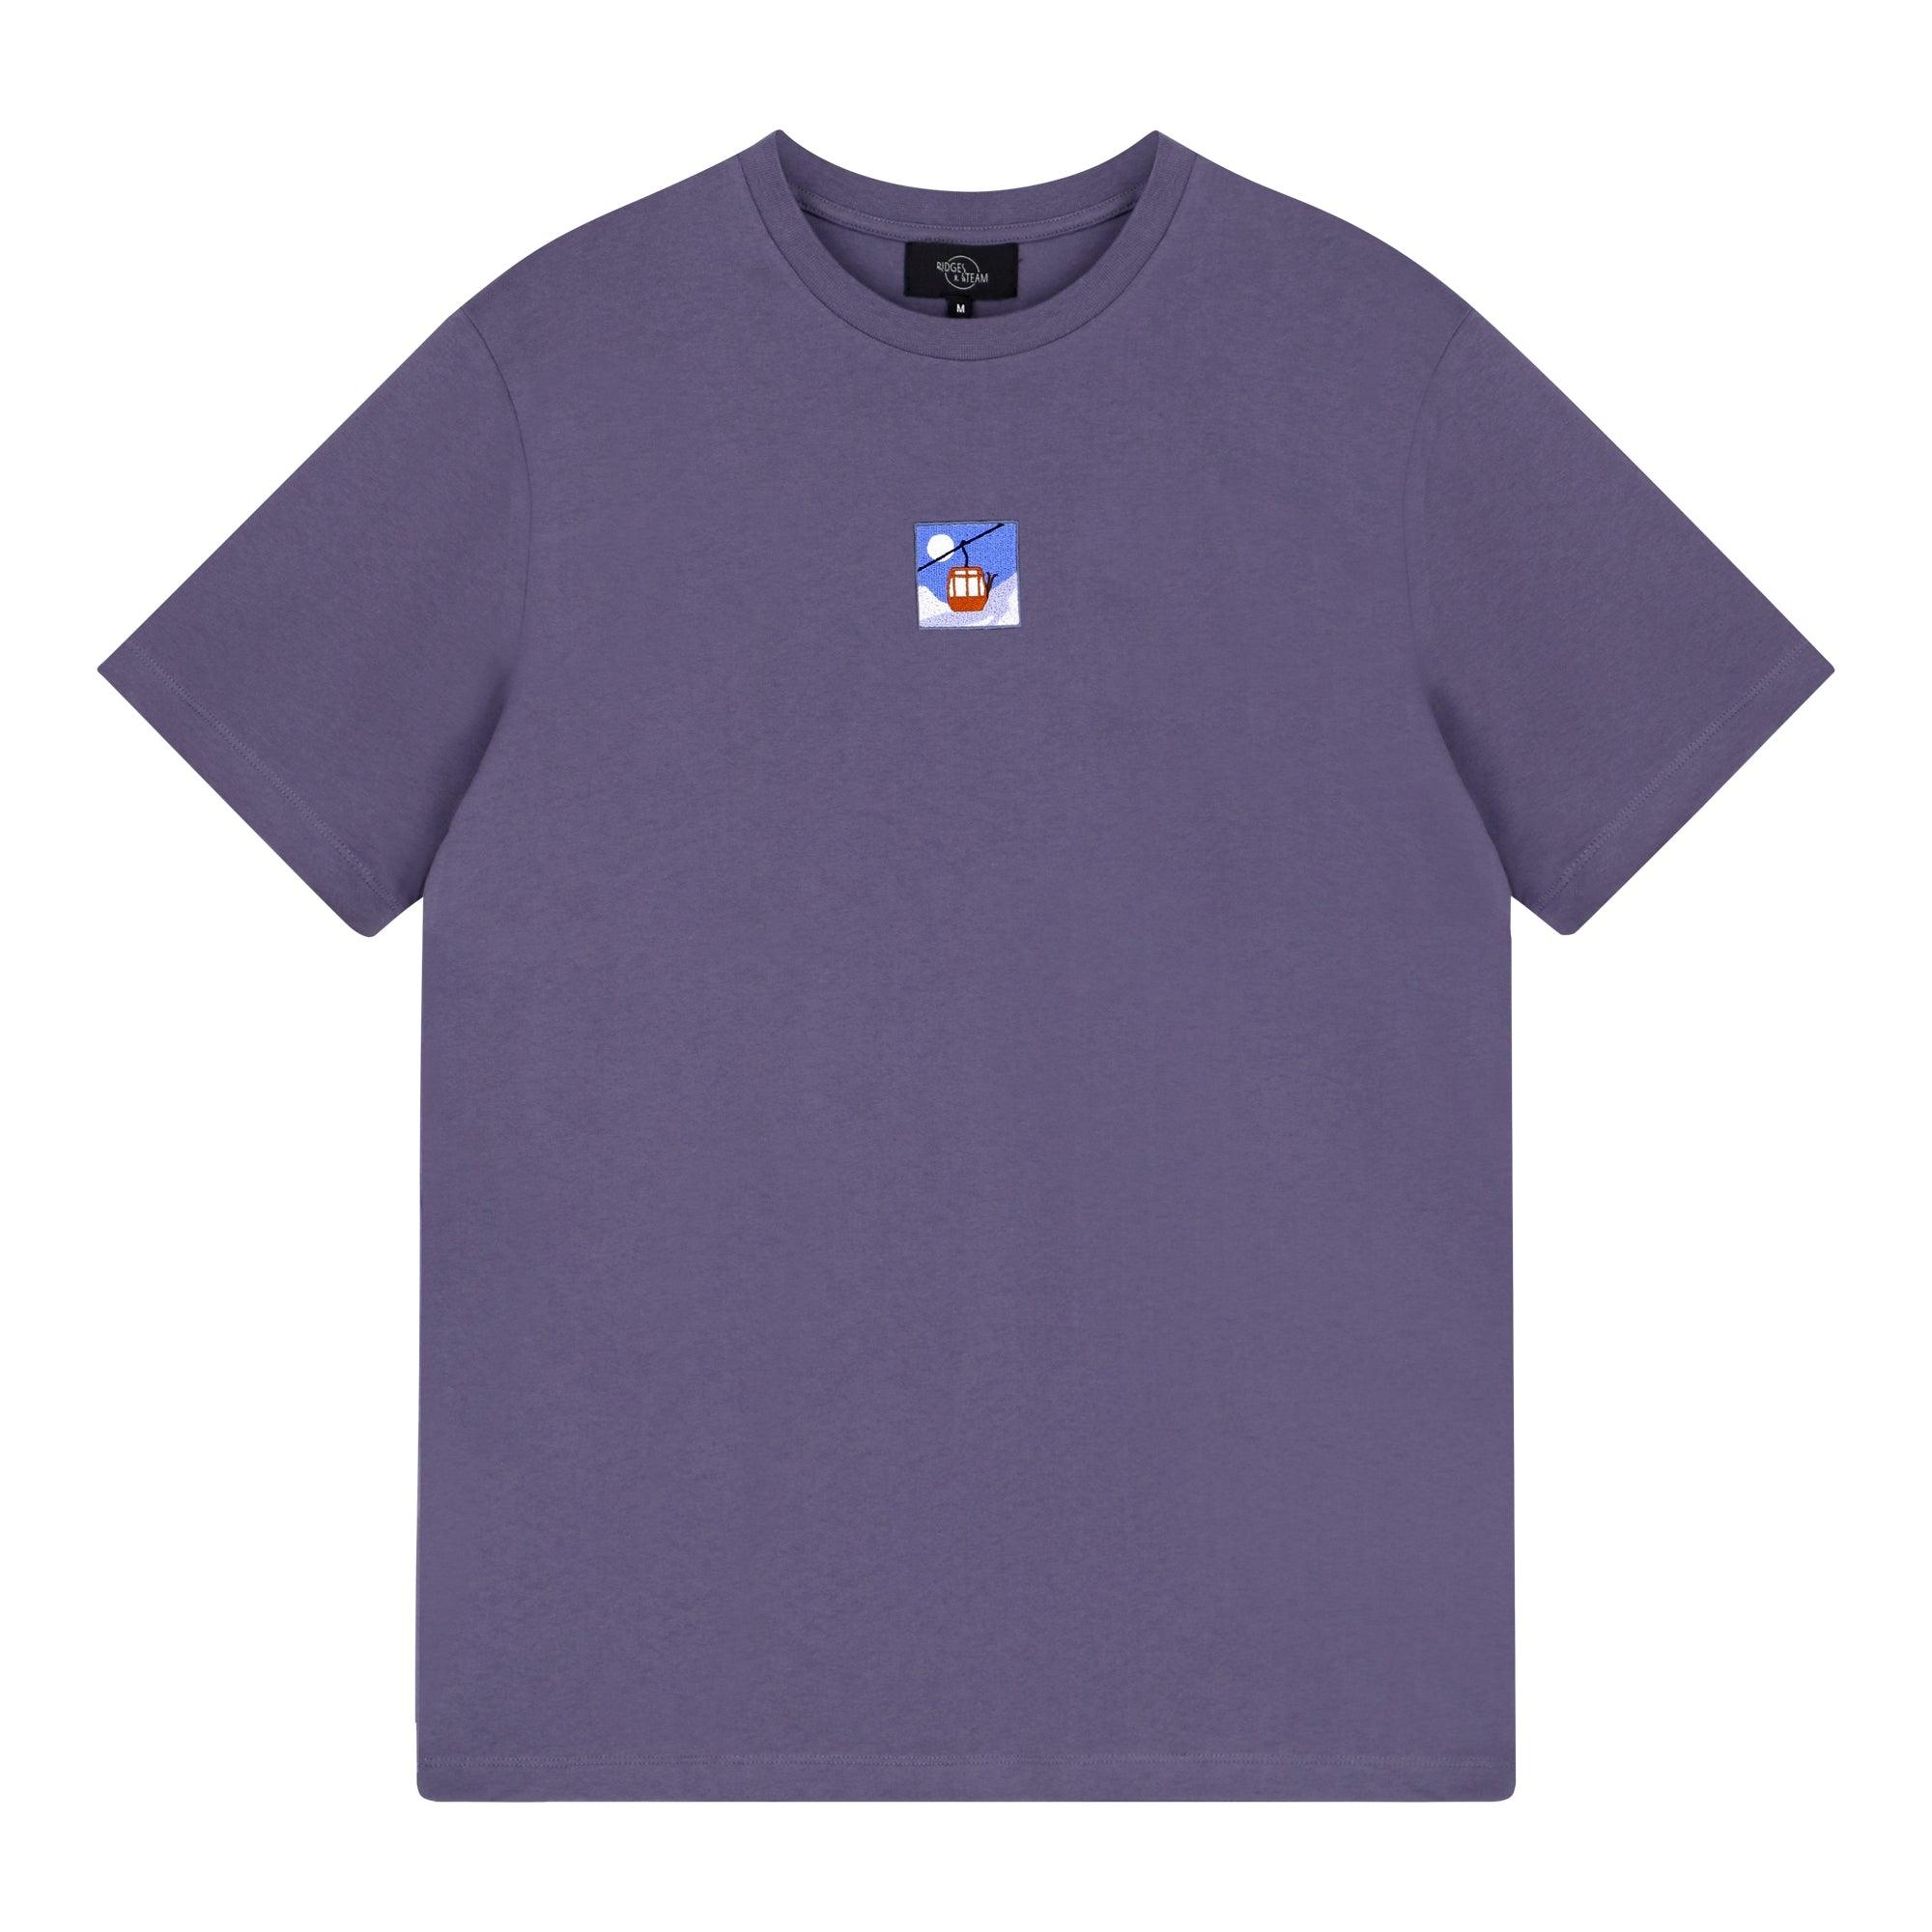 Hit the ski slopes with this unisex adult T-shirt with skilift embroidery. Matching sweater? No worries, we’ve got them too! Fairly made, free shipping to Belgium & the Netherlands